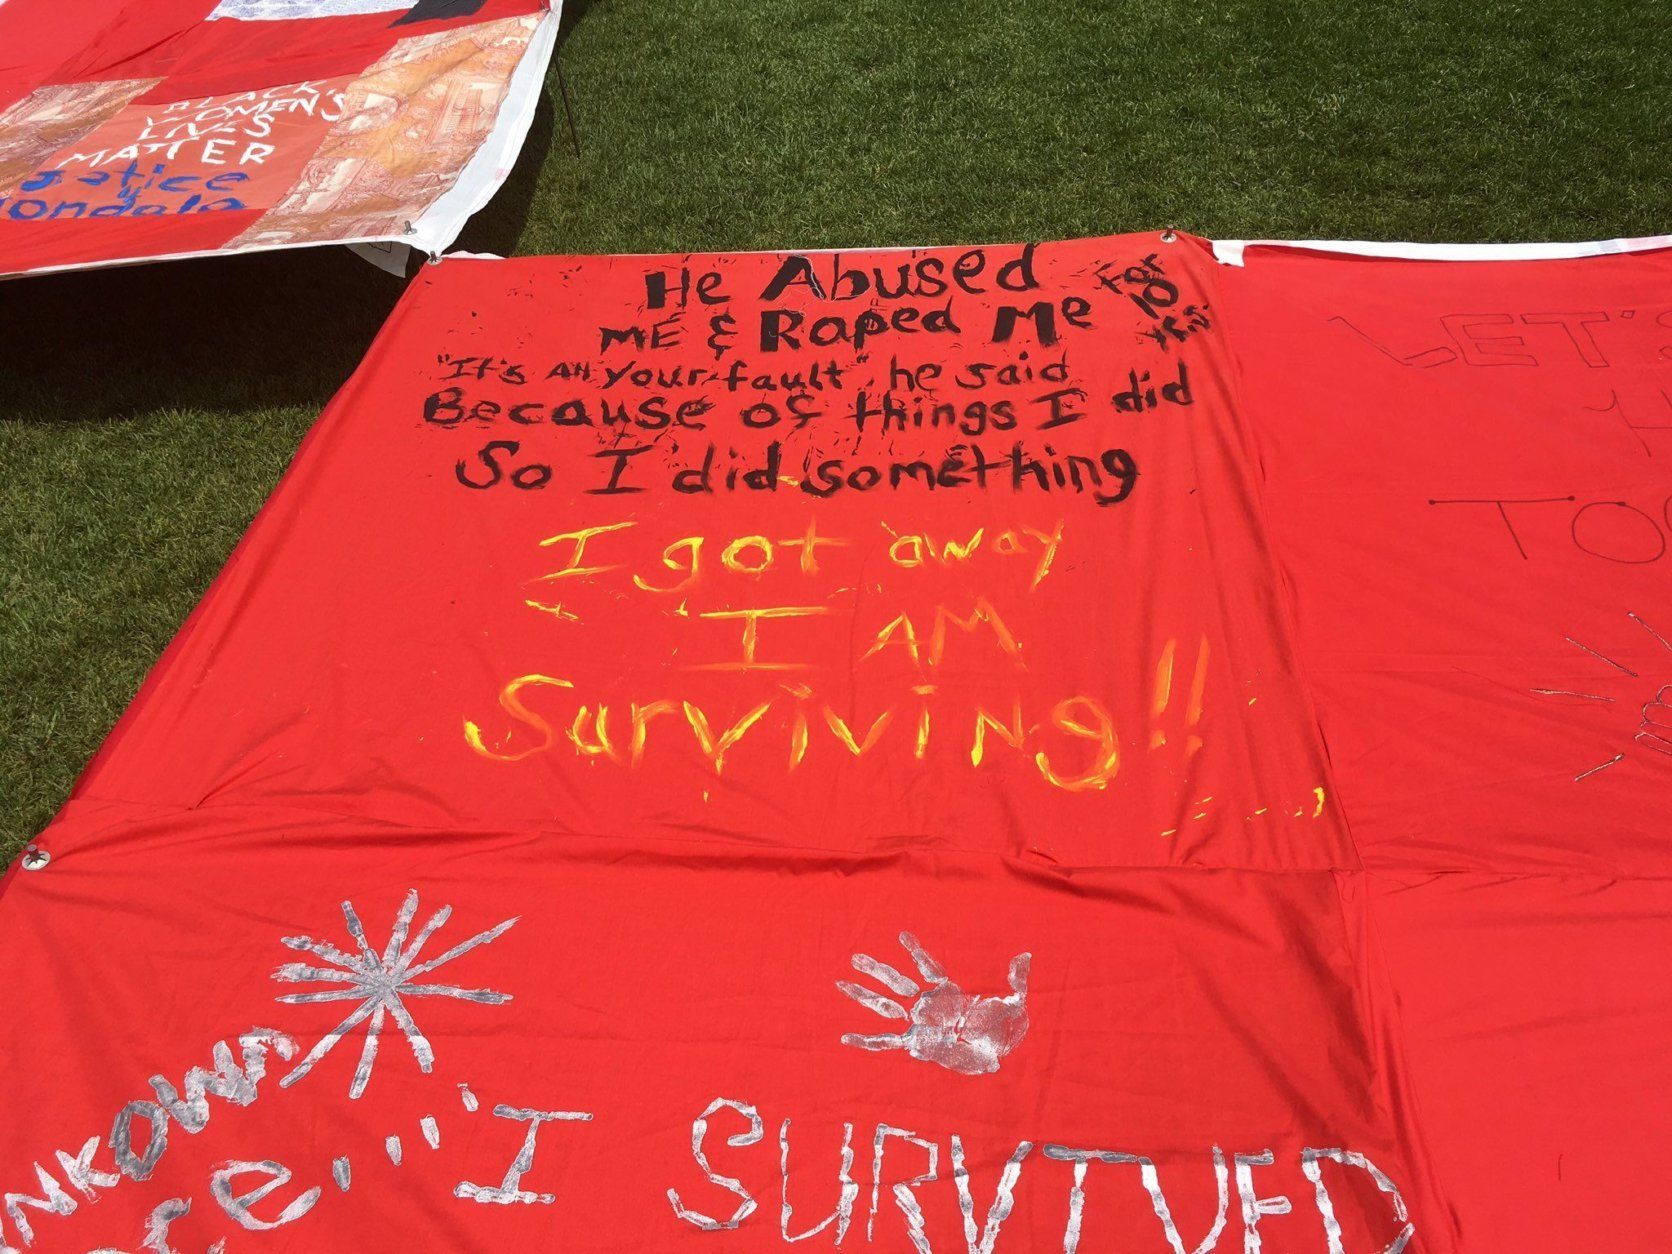 Large Quilts On National Mall Tell Stories Of Sexual Assault And 